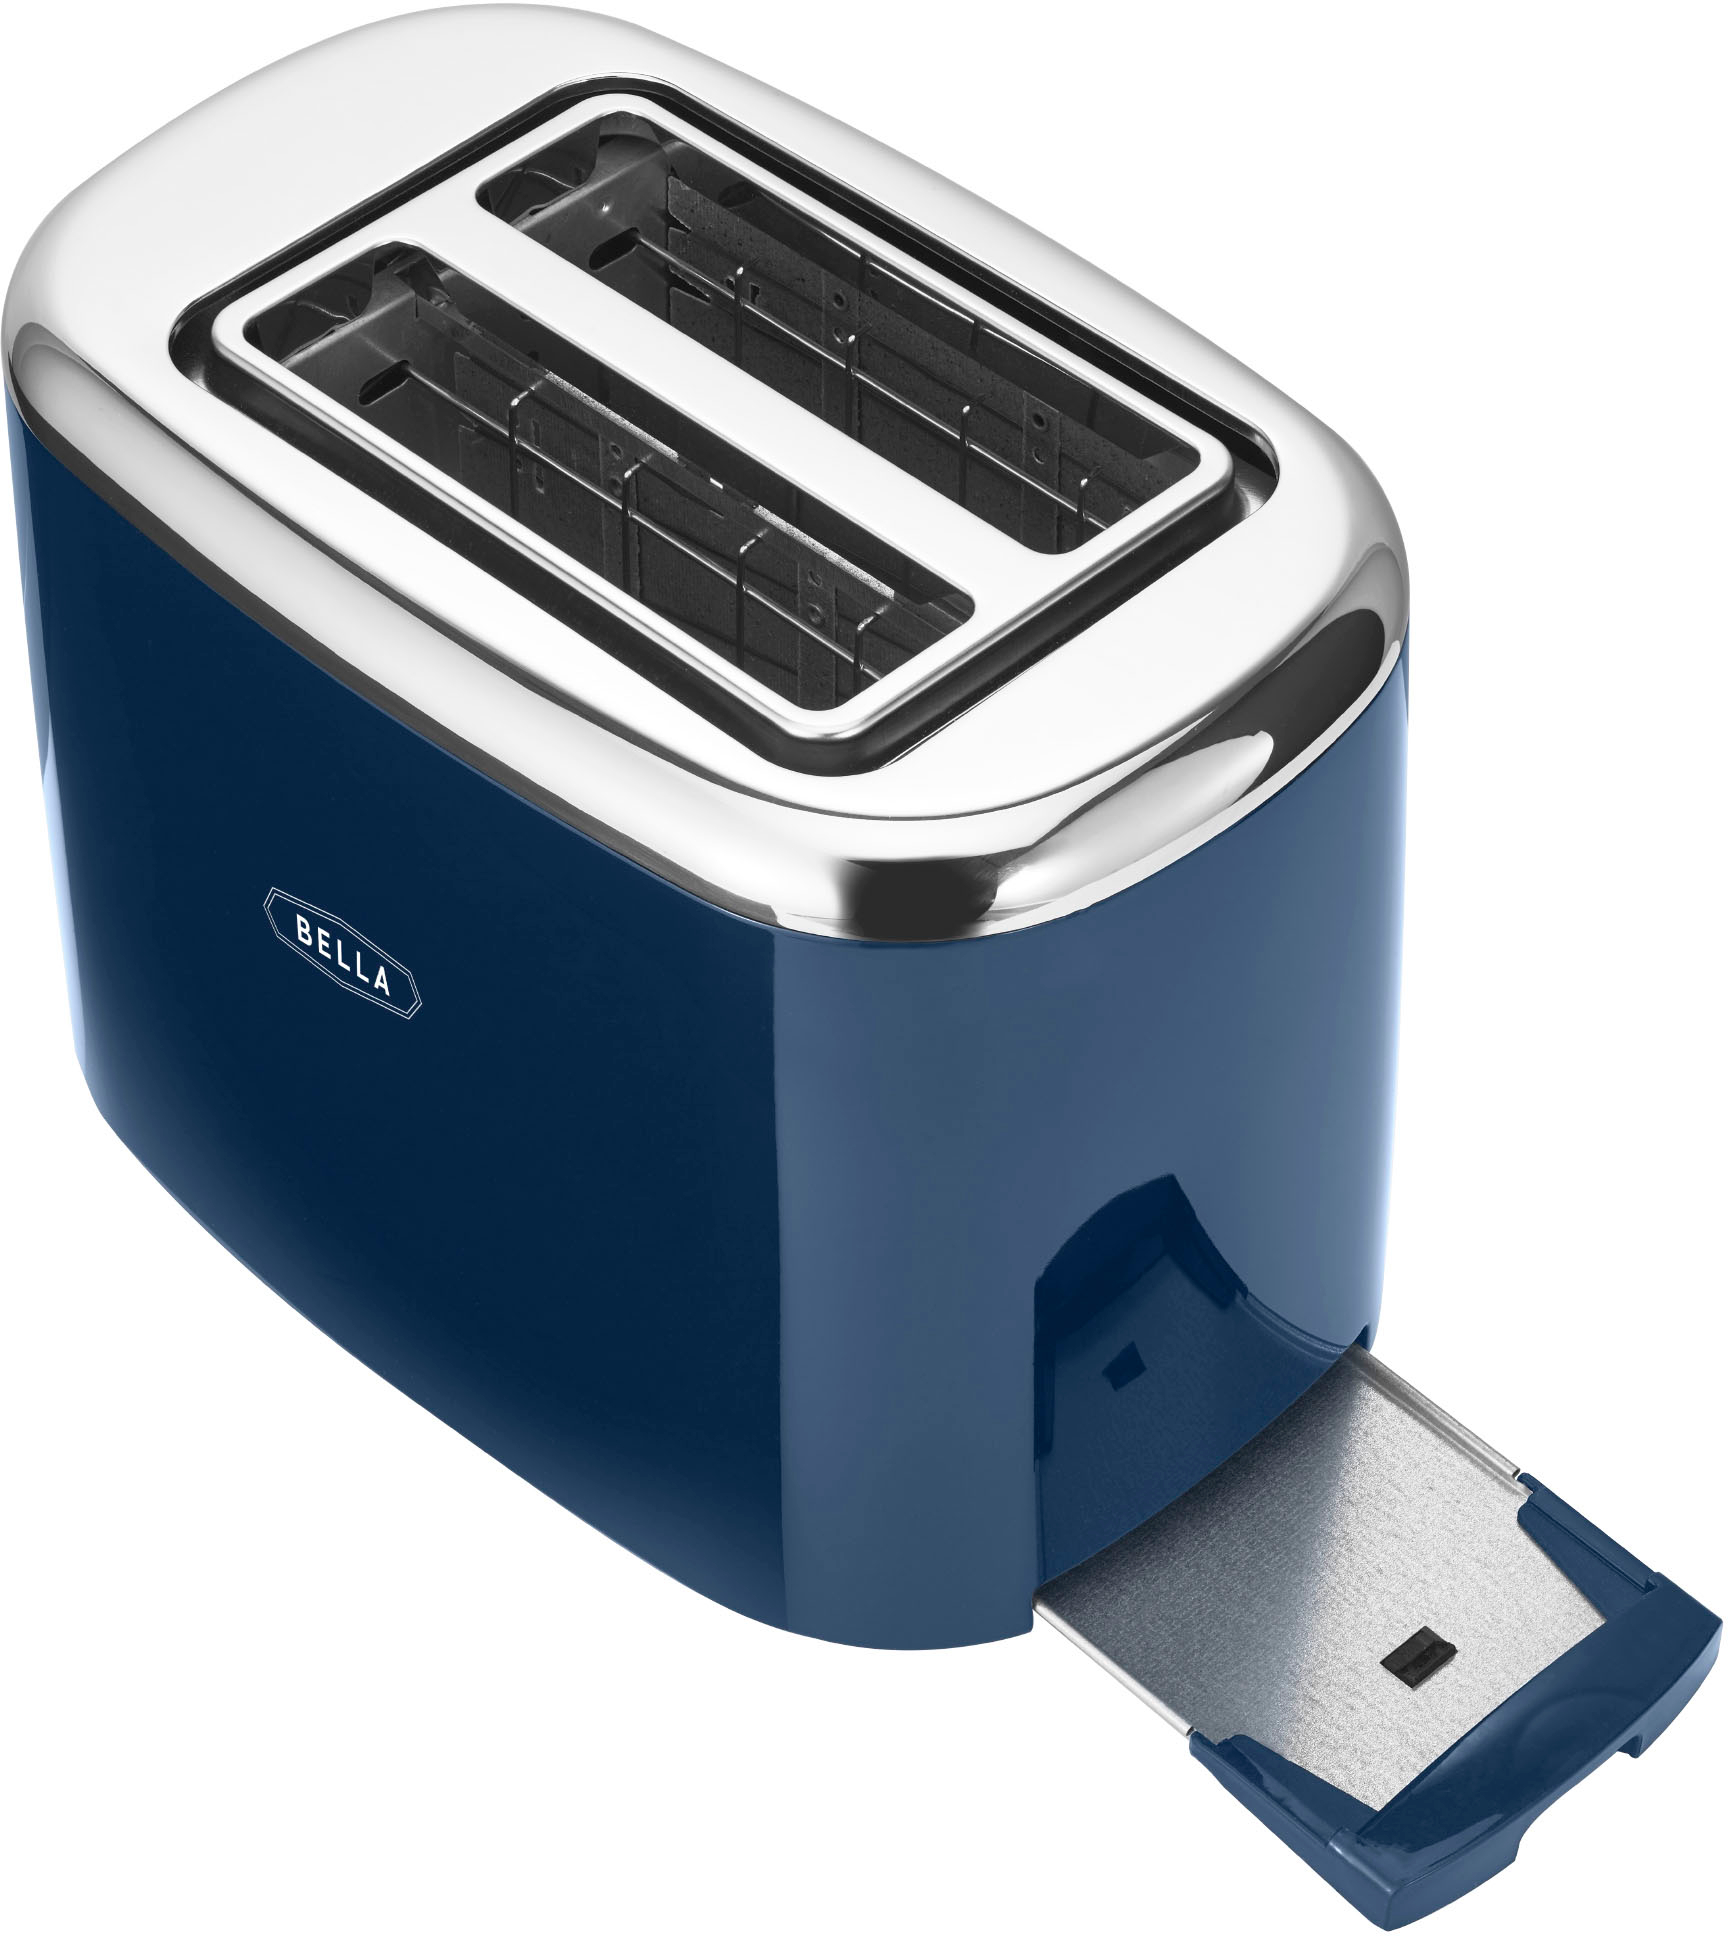 BELLA 4 Slice Long Slot Toaster, Stainless Steel and Blue